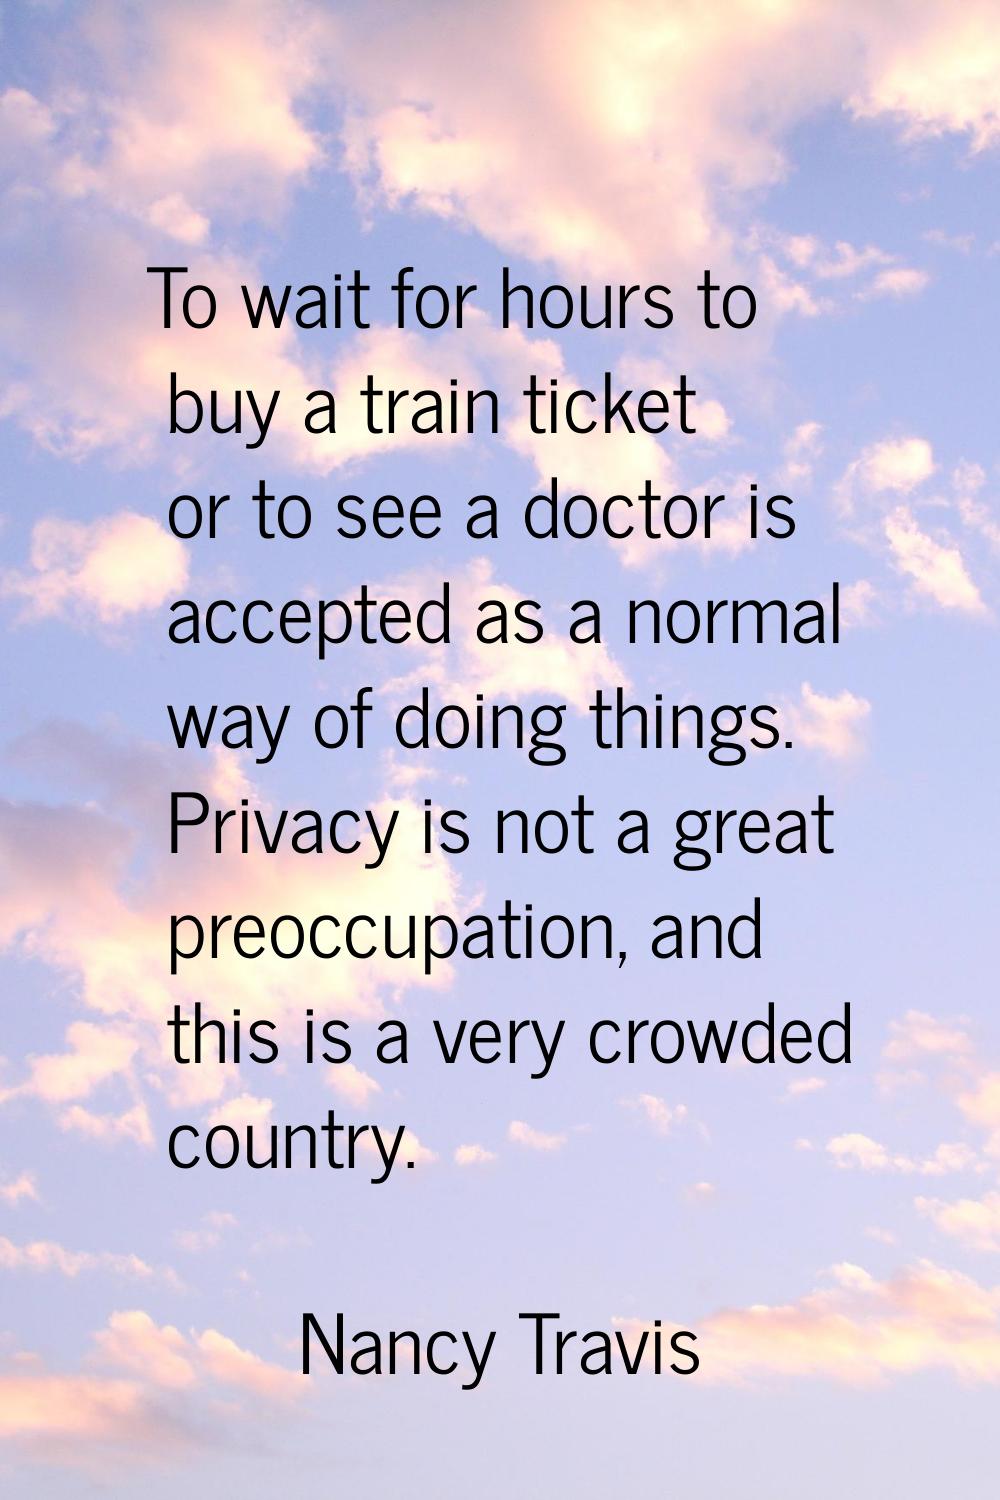 To wait for hours to buy a train ticket or to see a doctor is accepted as a normal way of doing thi